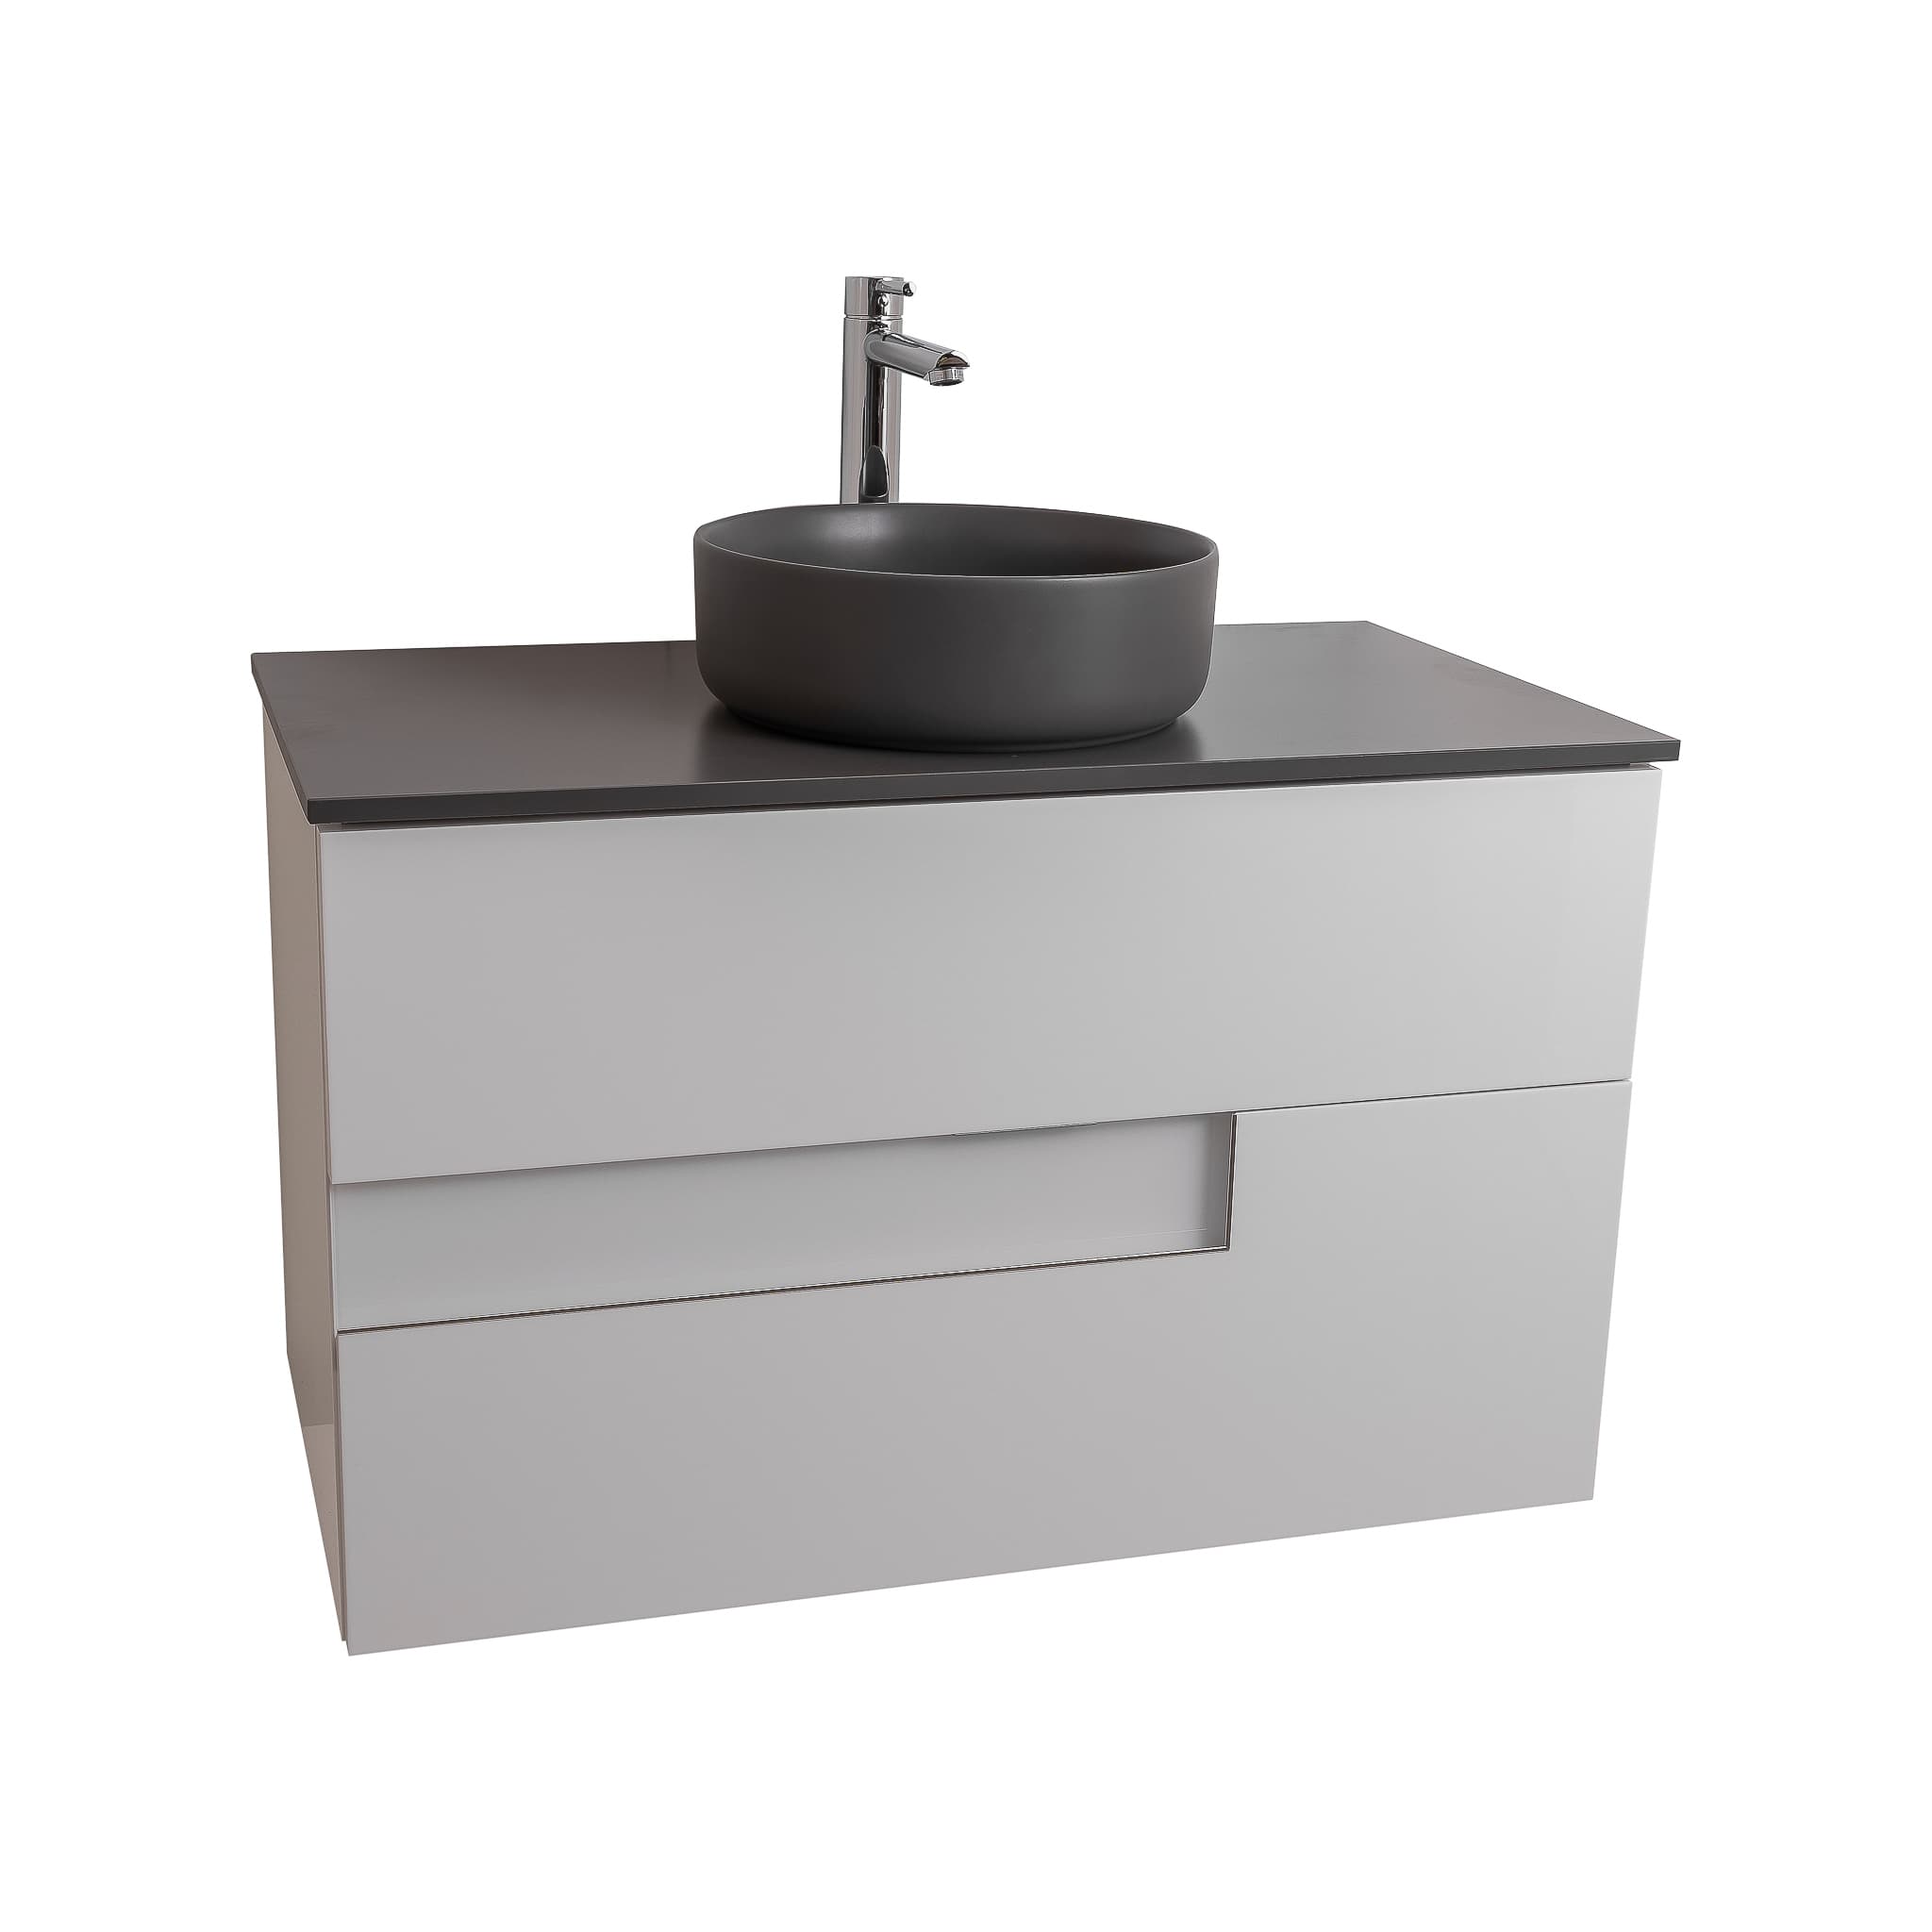 Vision 39.5 White High Gloss Cabinet, Ares Grey Ceniza Top And Ares Grey Ceniza Ceramic Basin, Wall Mounted Modern Vanity Set